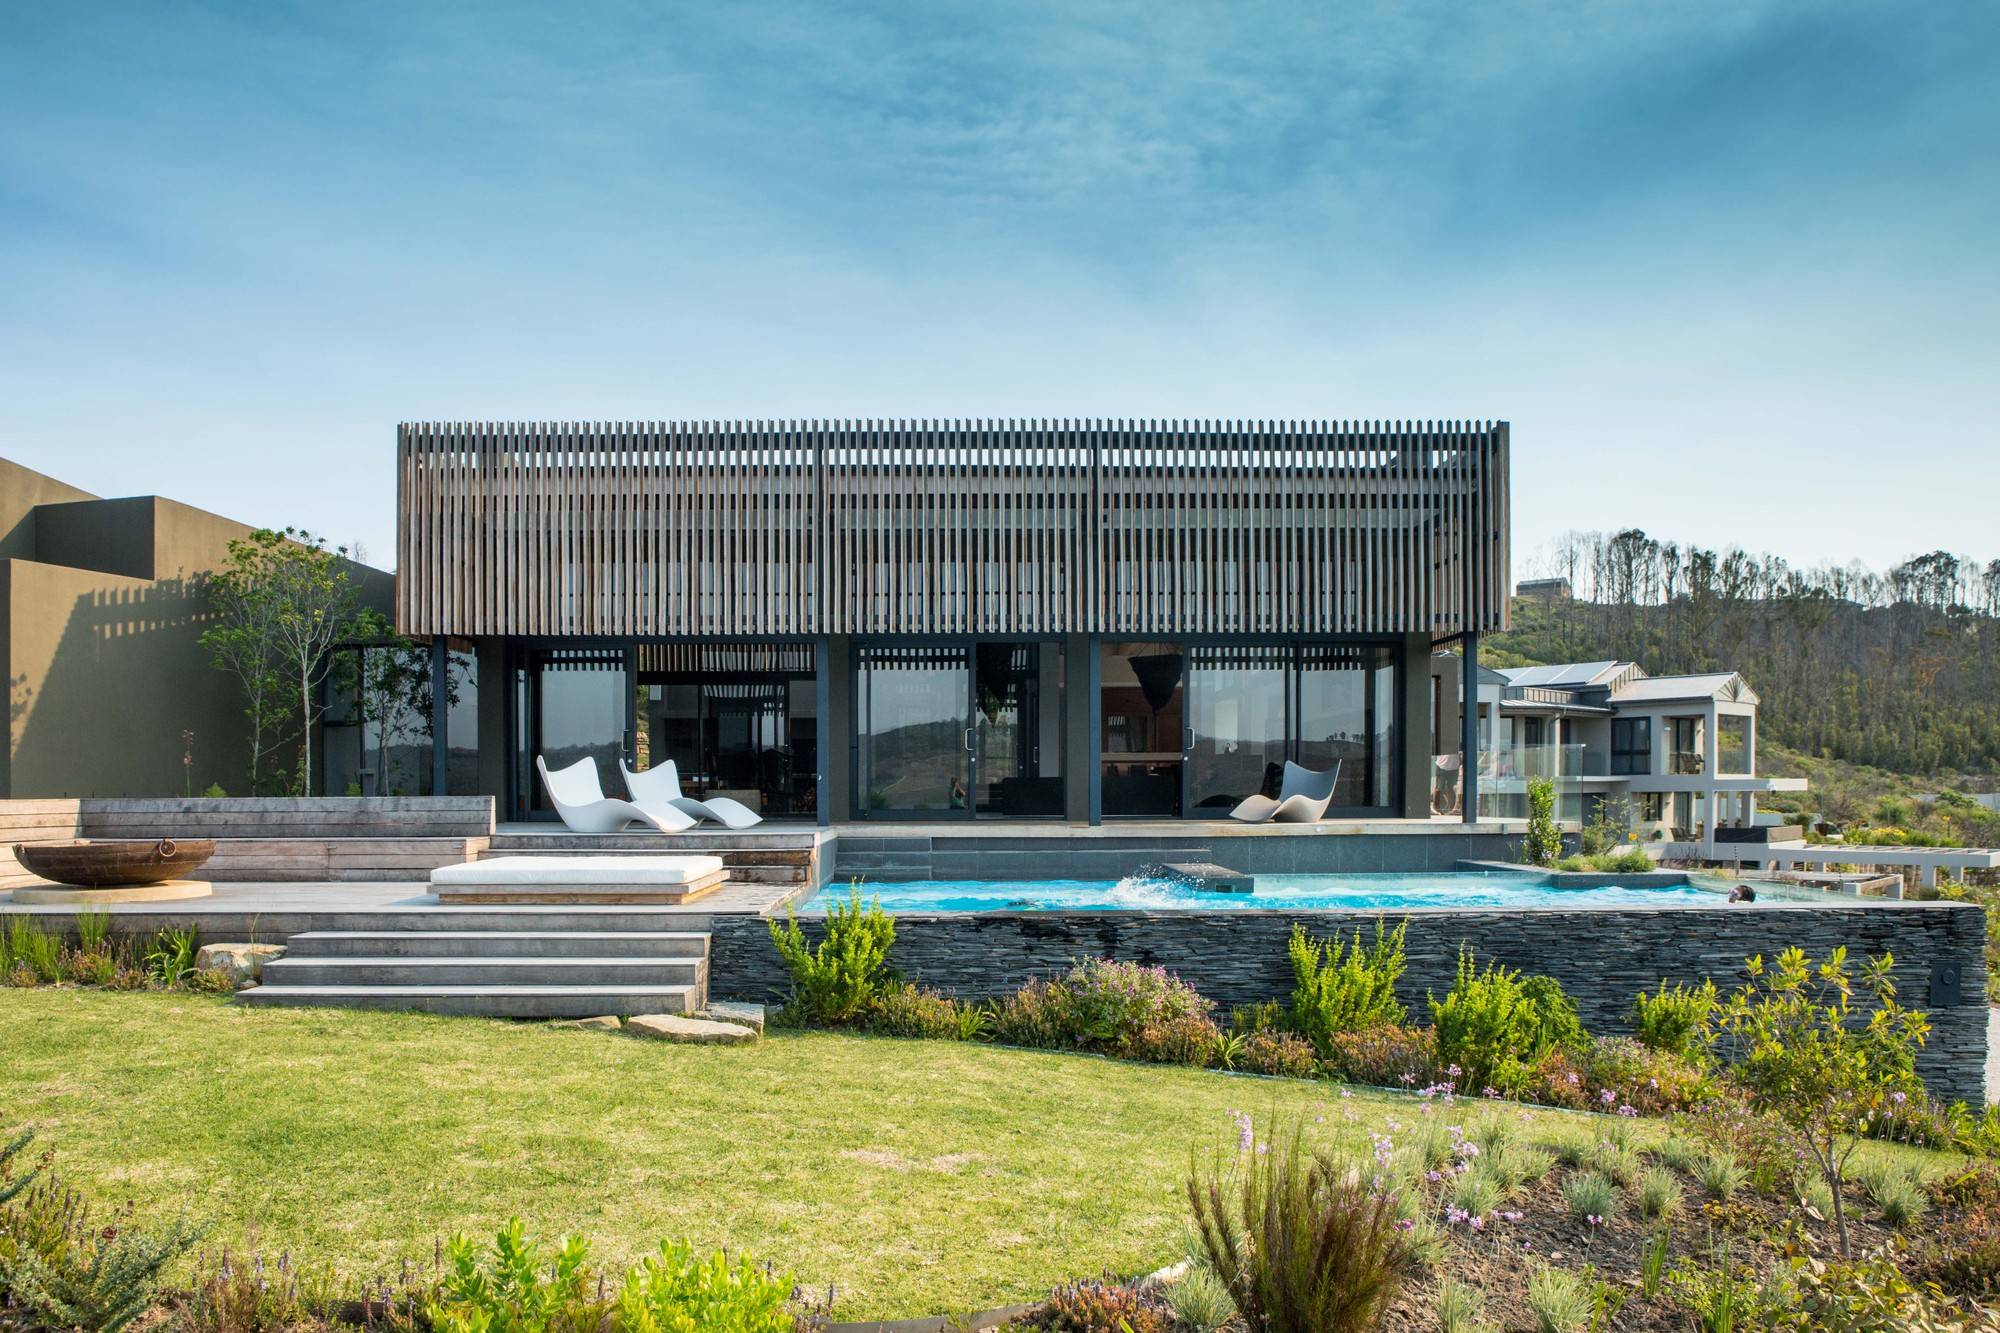 Imbizo-House-designed-by-KSR-Architects-and-Interior-Designers-in-South-Africa-25792